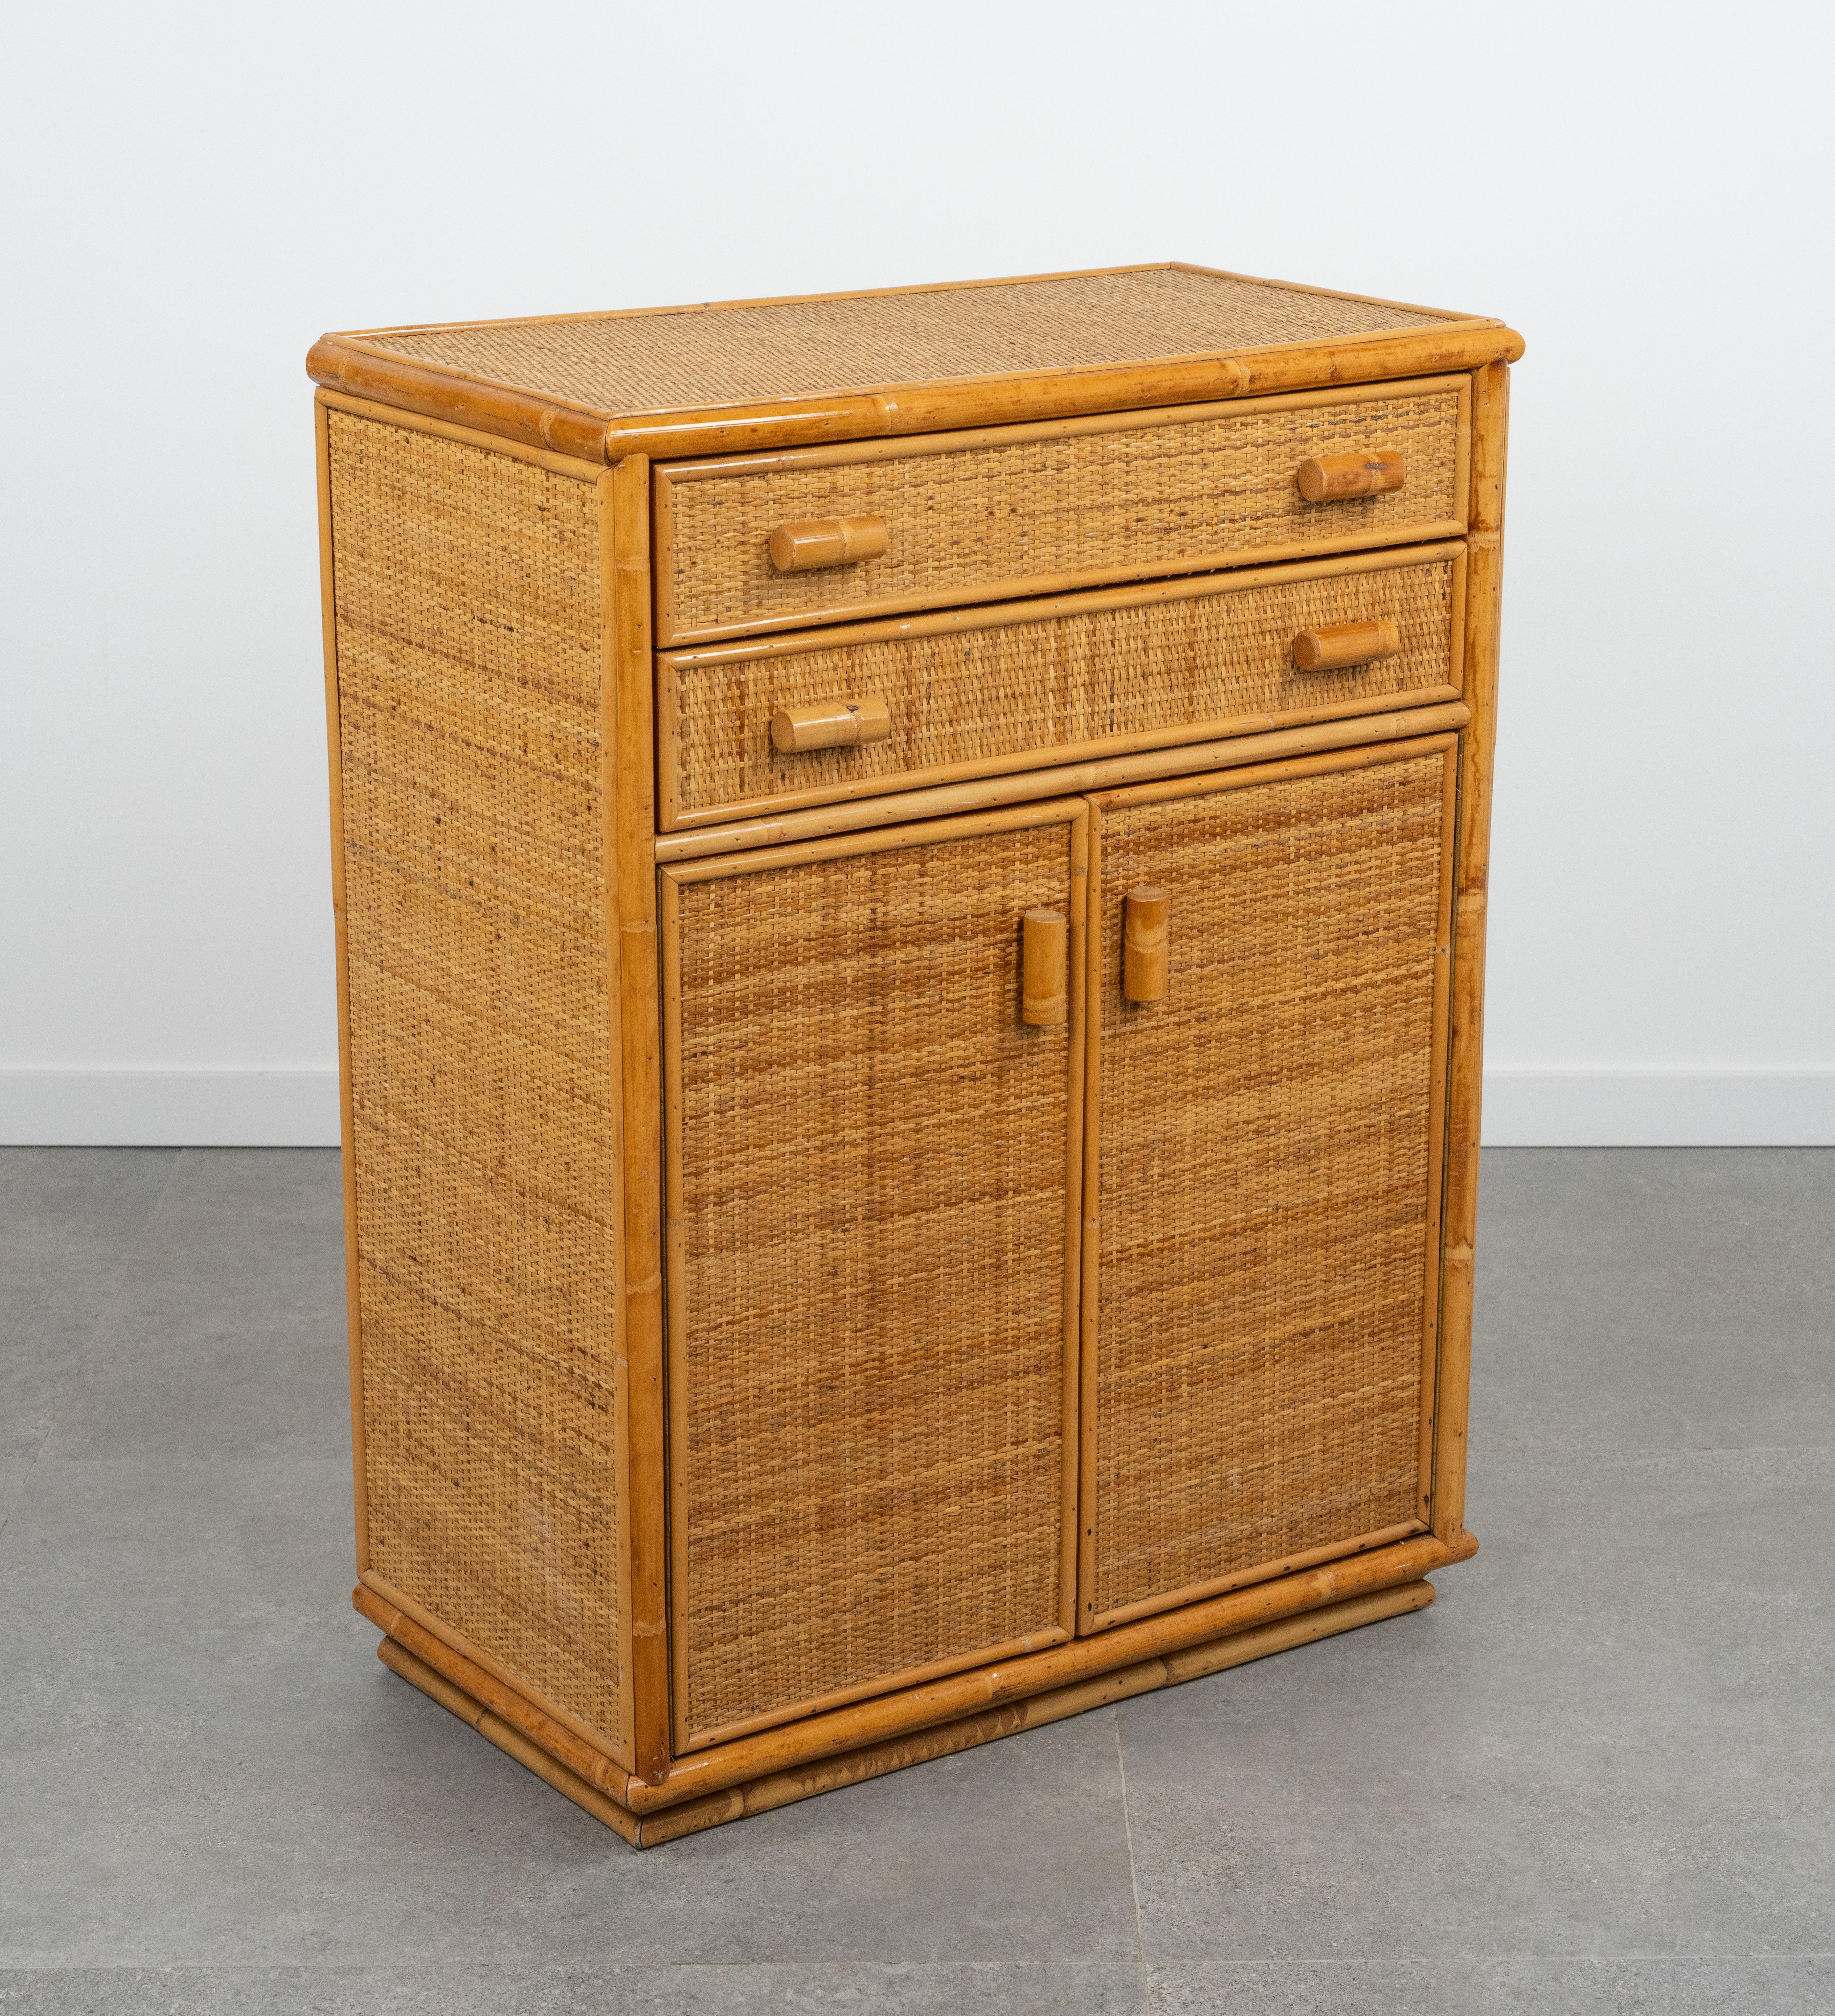 Midcentury beautiful chest of drawers in bamboo, rattan and wicker.  

Made in Italy in the 1970s.  